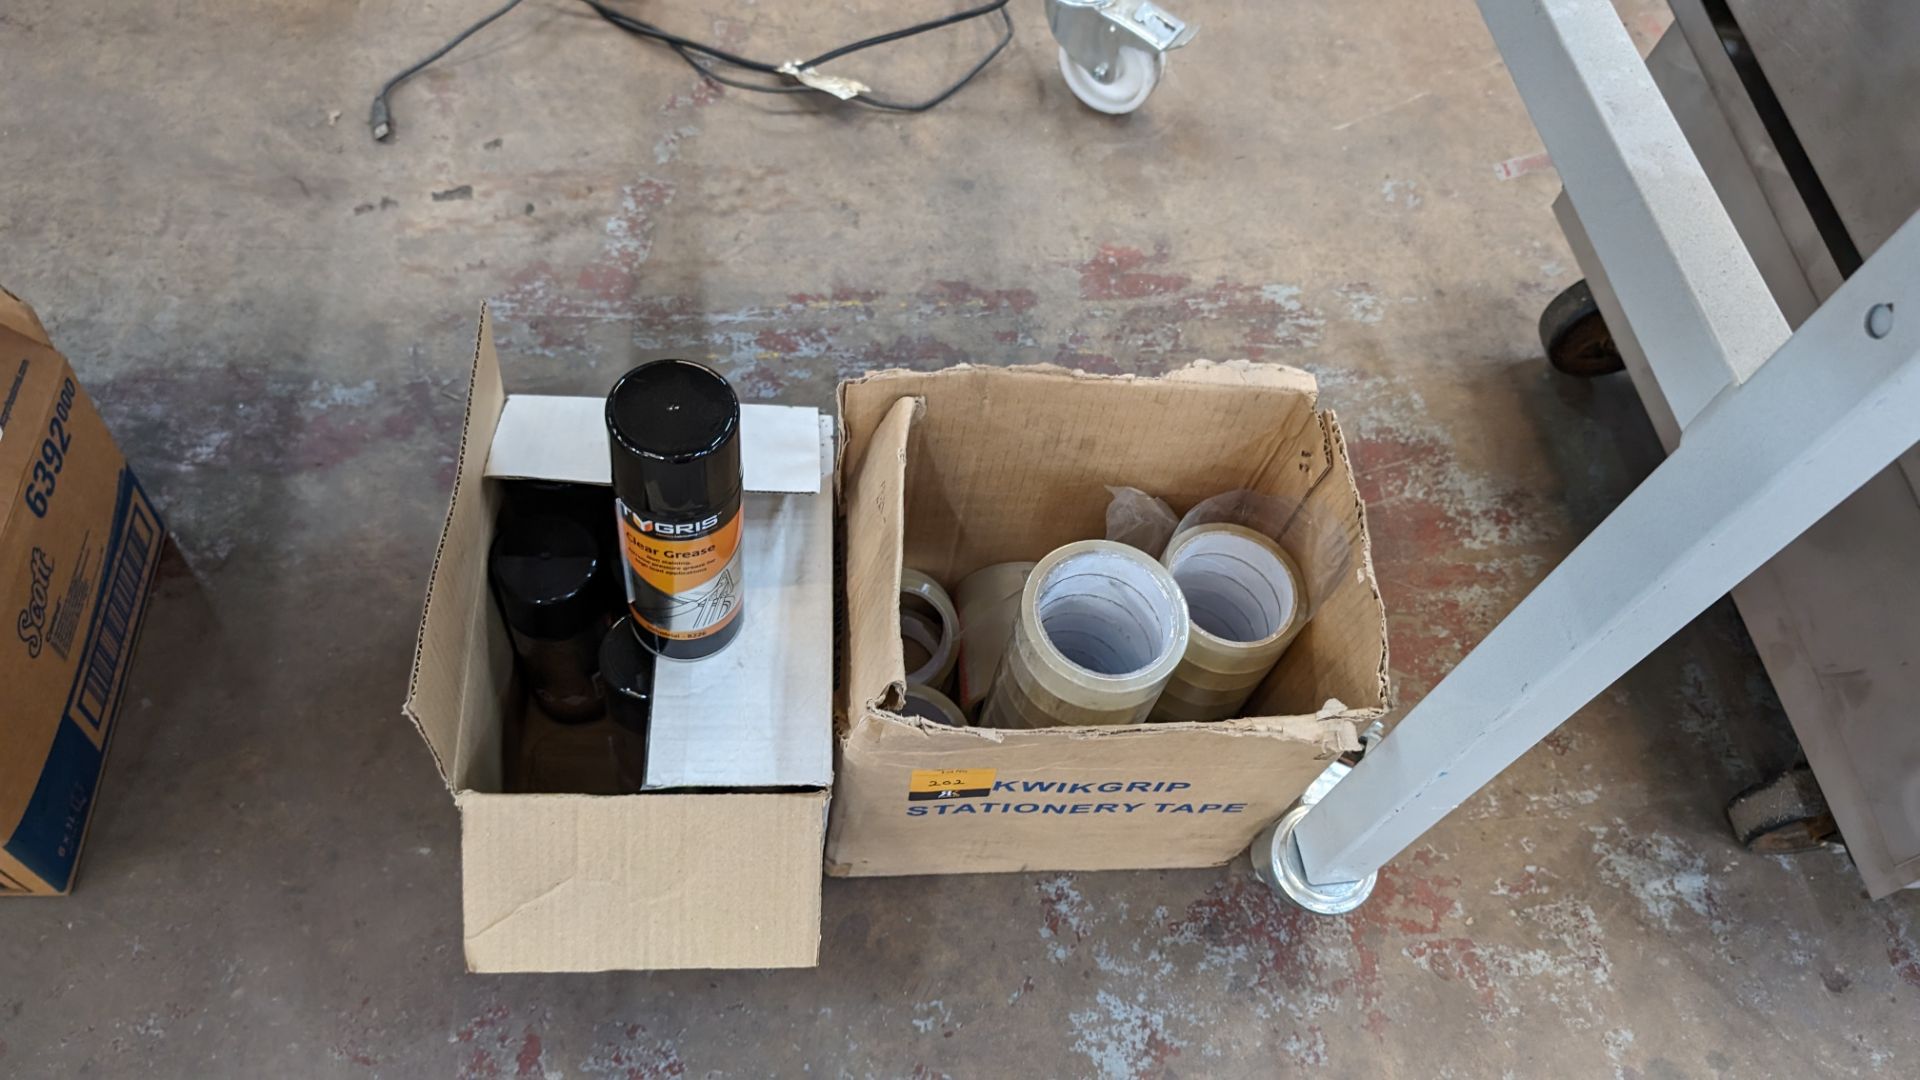 Box of tape plus box of grease spray - Image 6 of 6